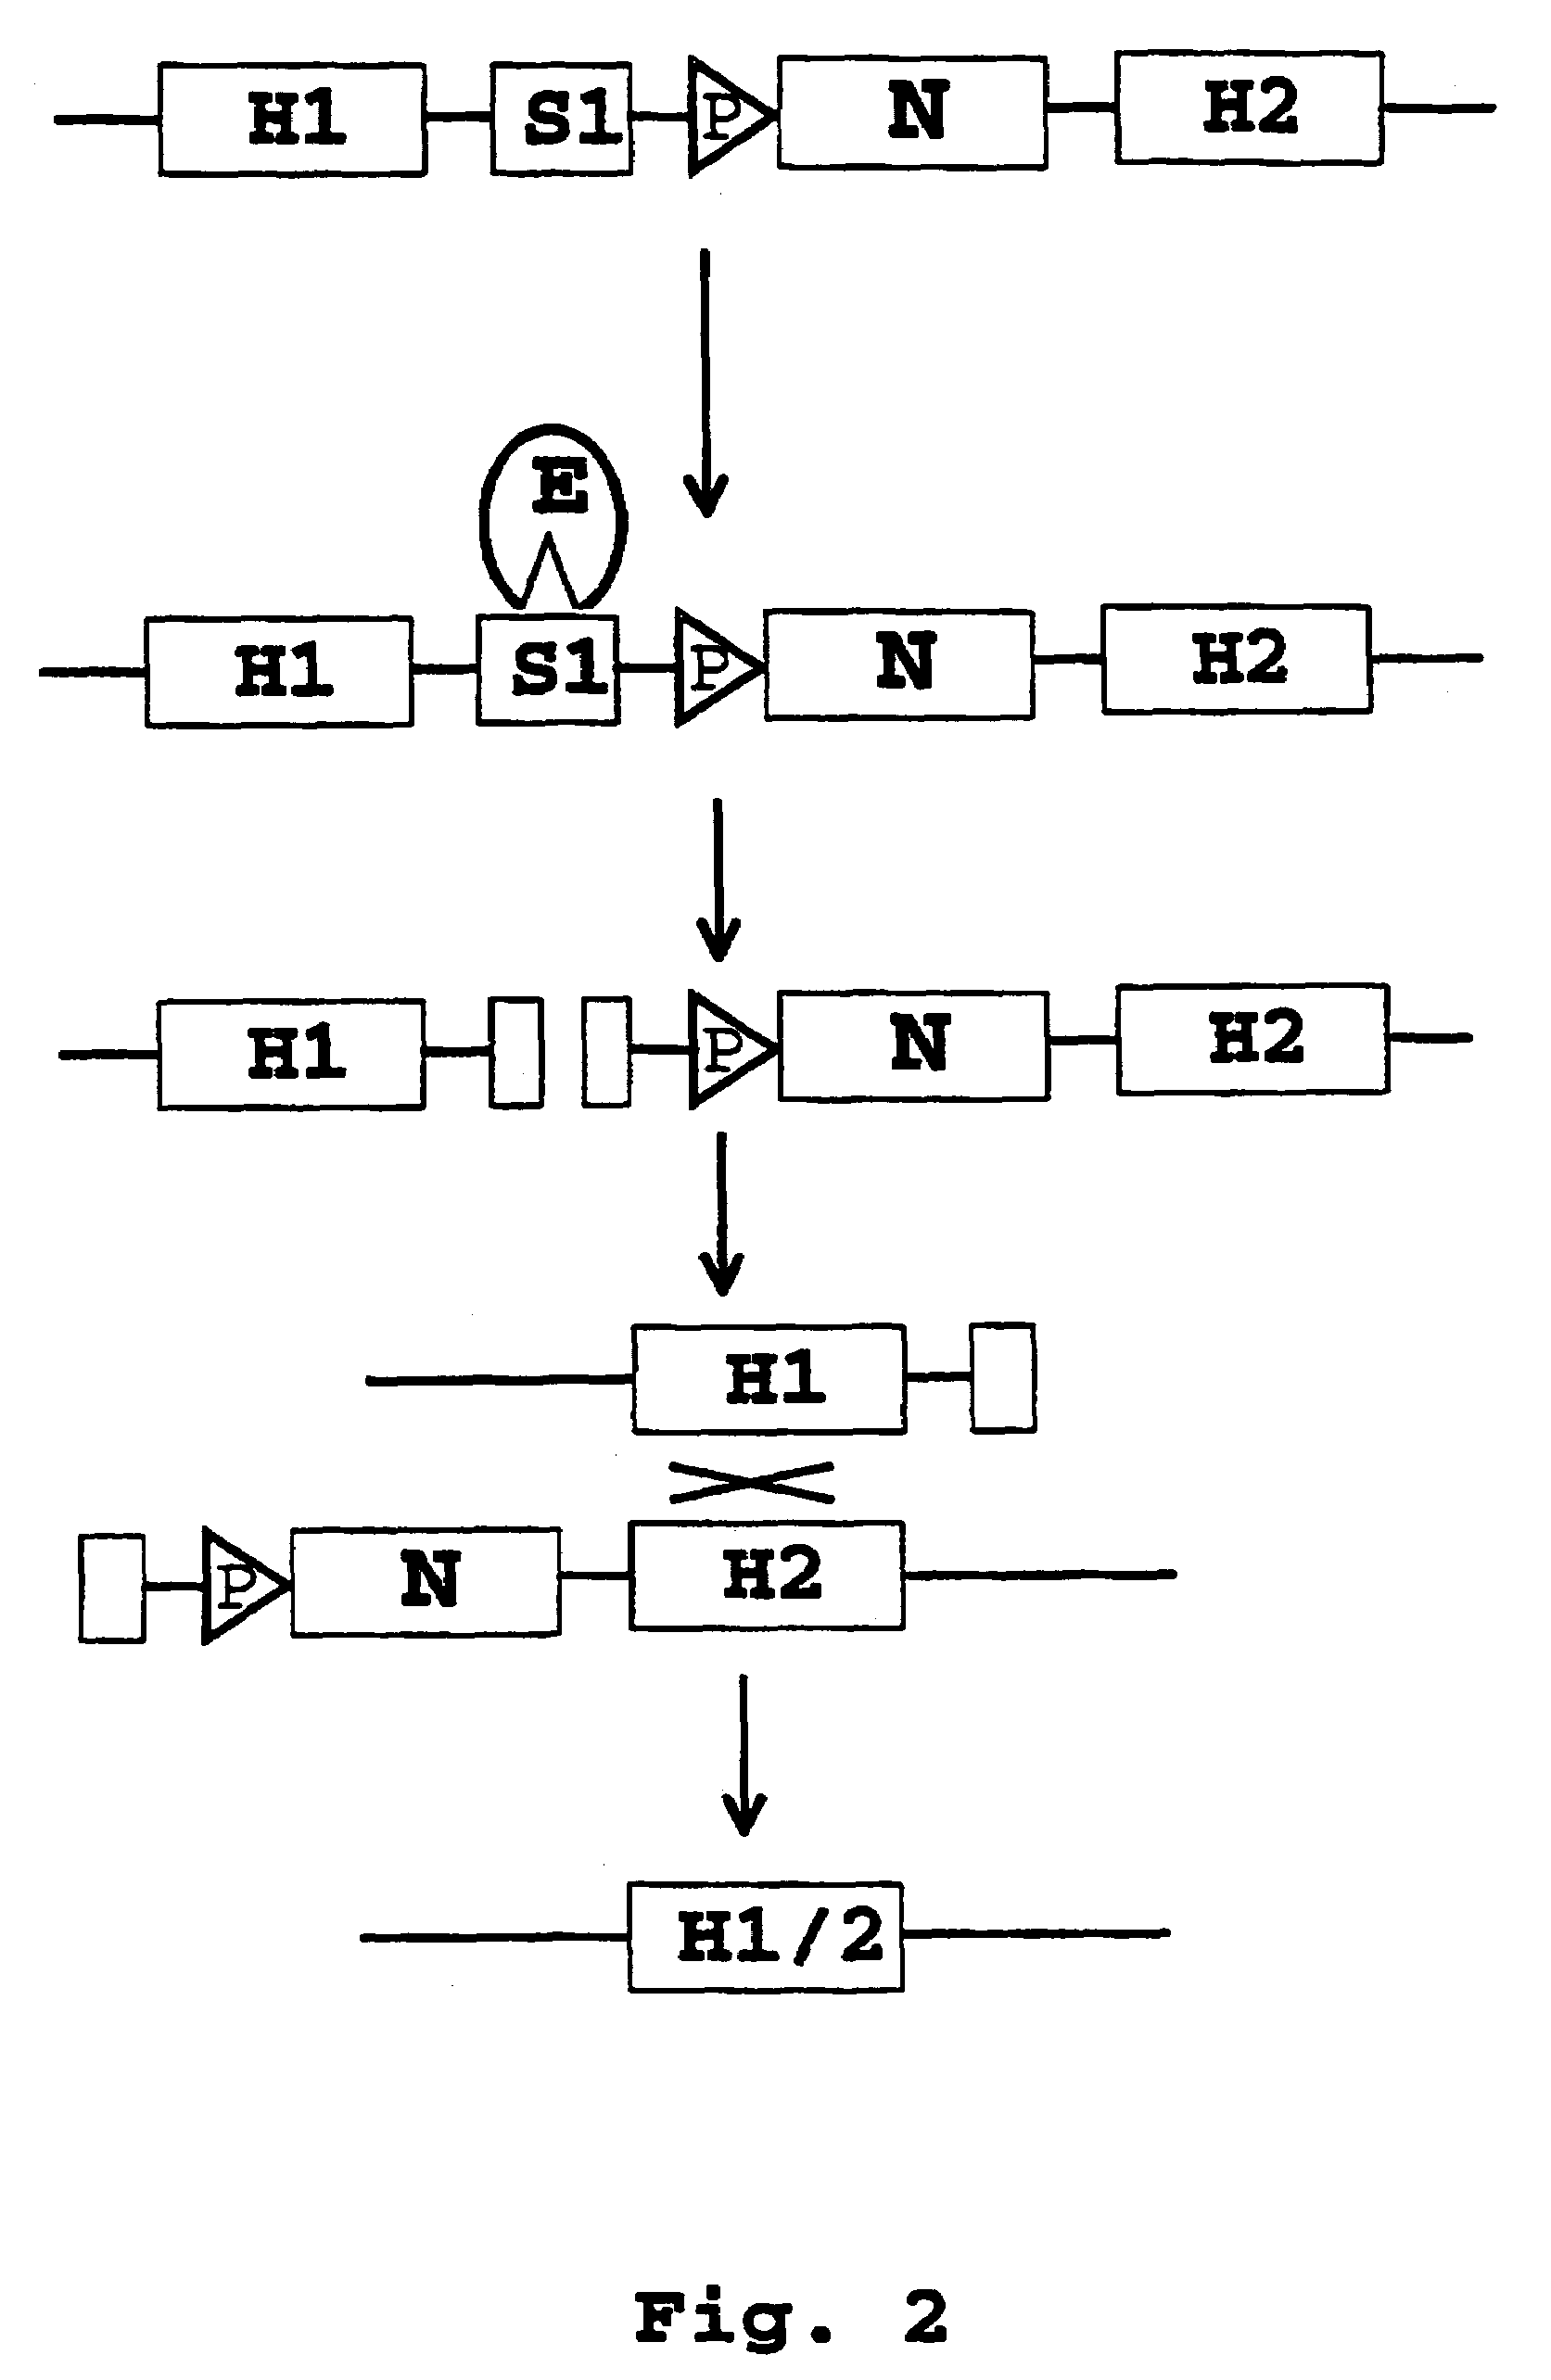 Recombination systems and methods for eliminating nucleic acid sequences from the genome of eukaryotic organisms